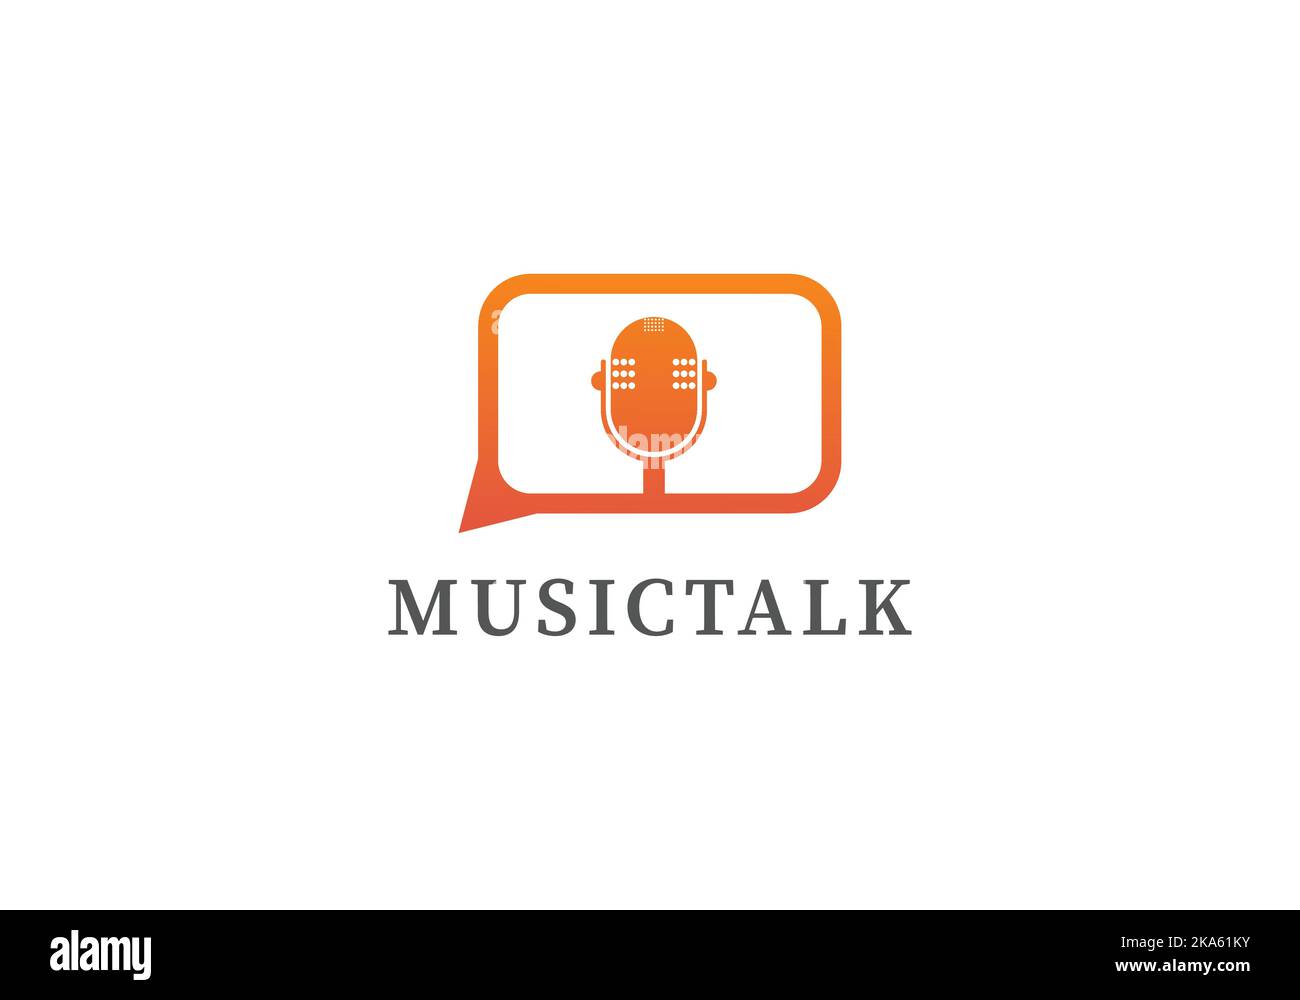 professional logo template. Illustrated musical logos, music chat, with chat bubbles. for the application logo, event, community, etc. vector eps 10. Stock Vector